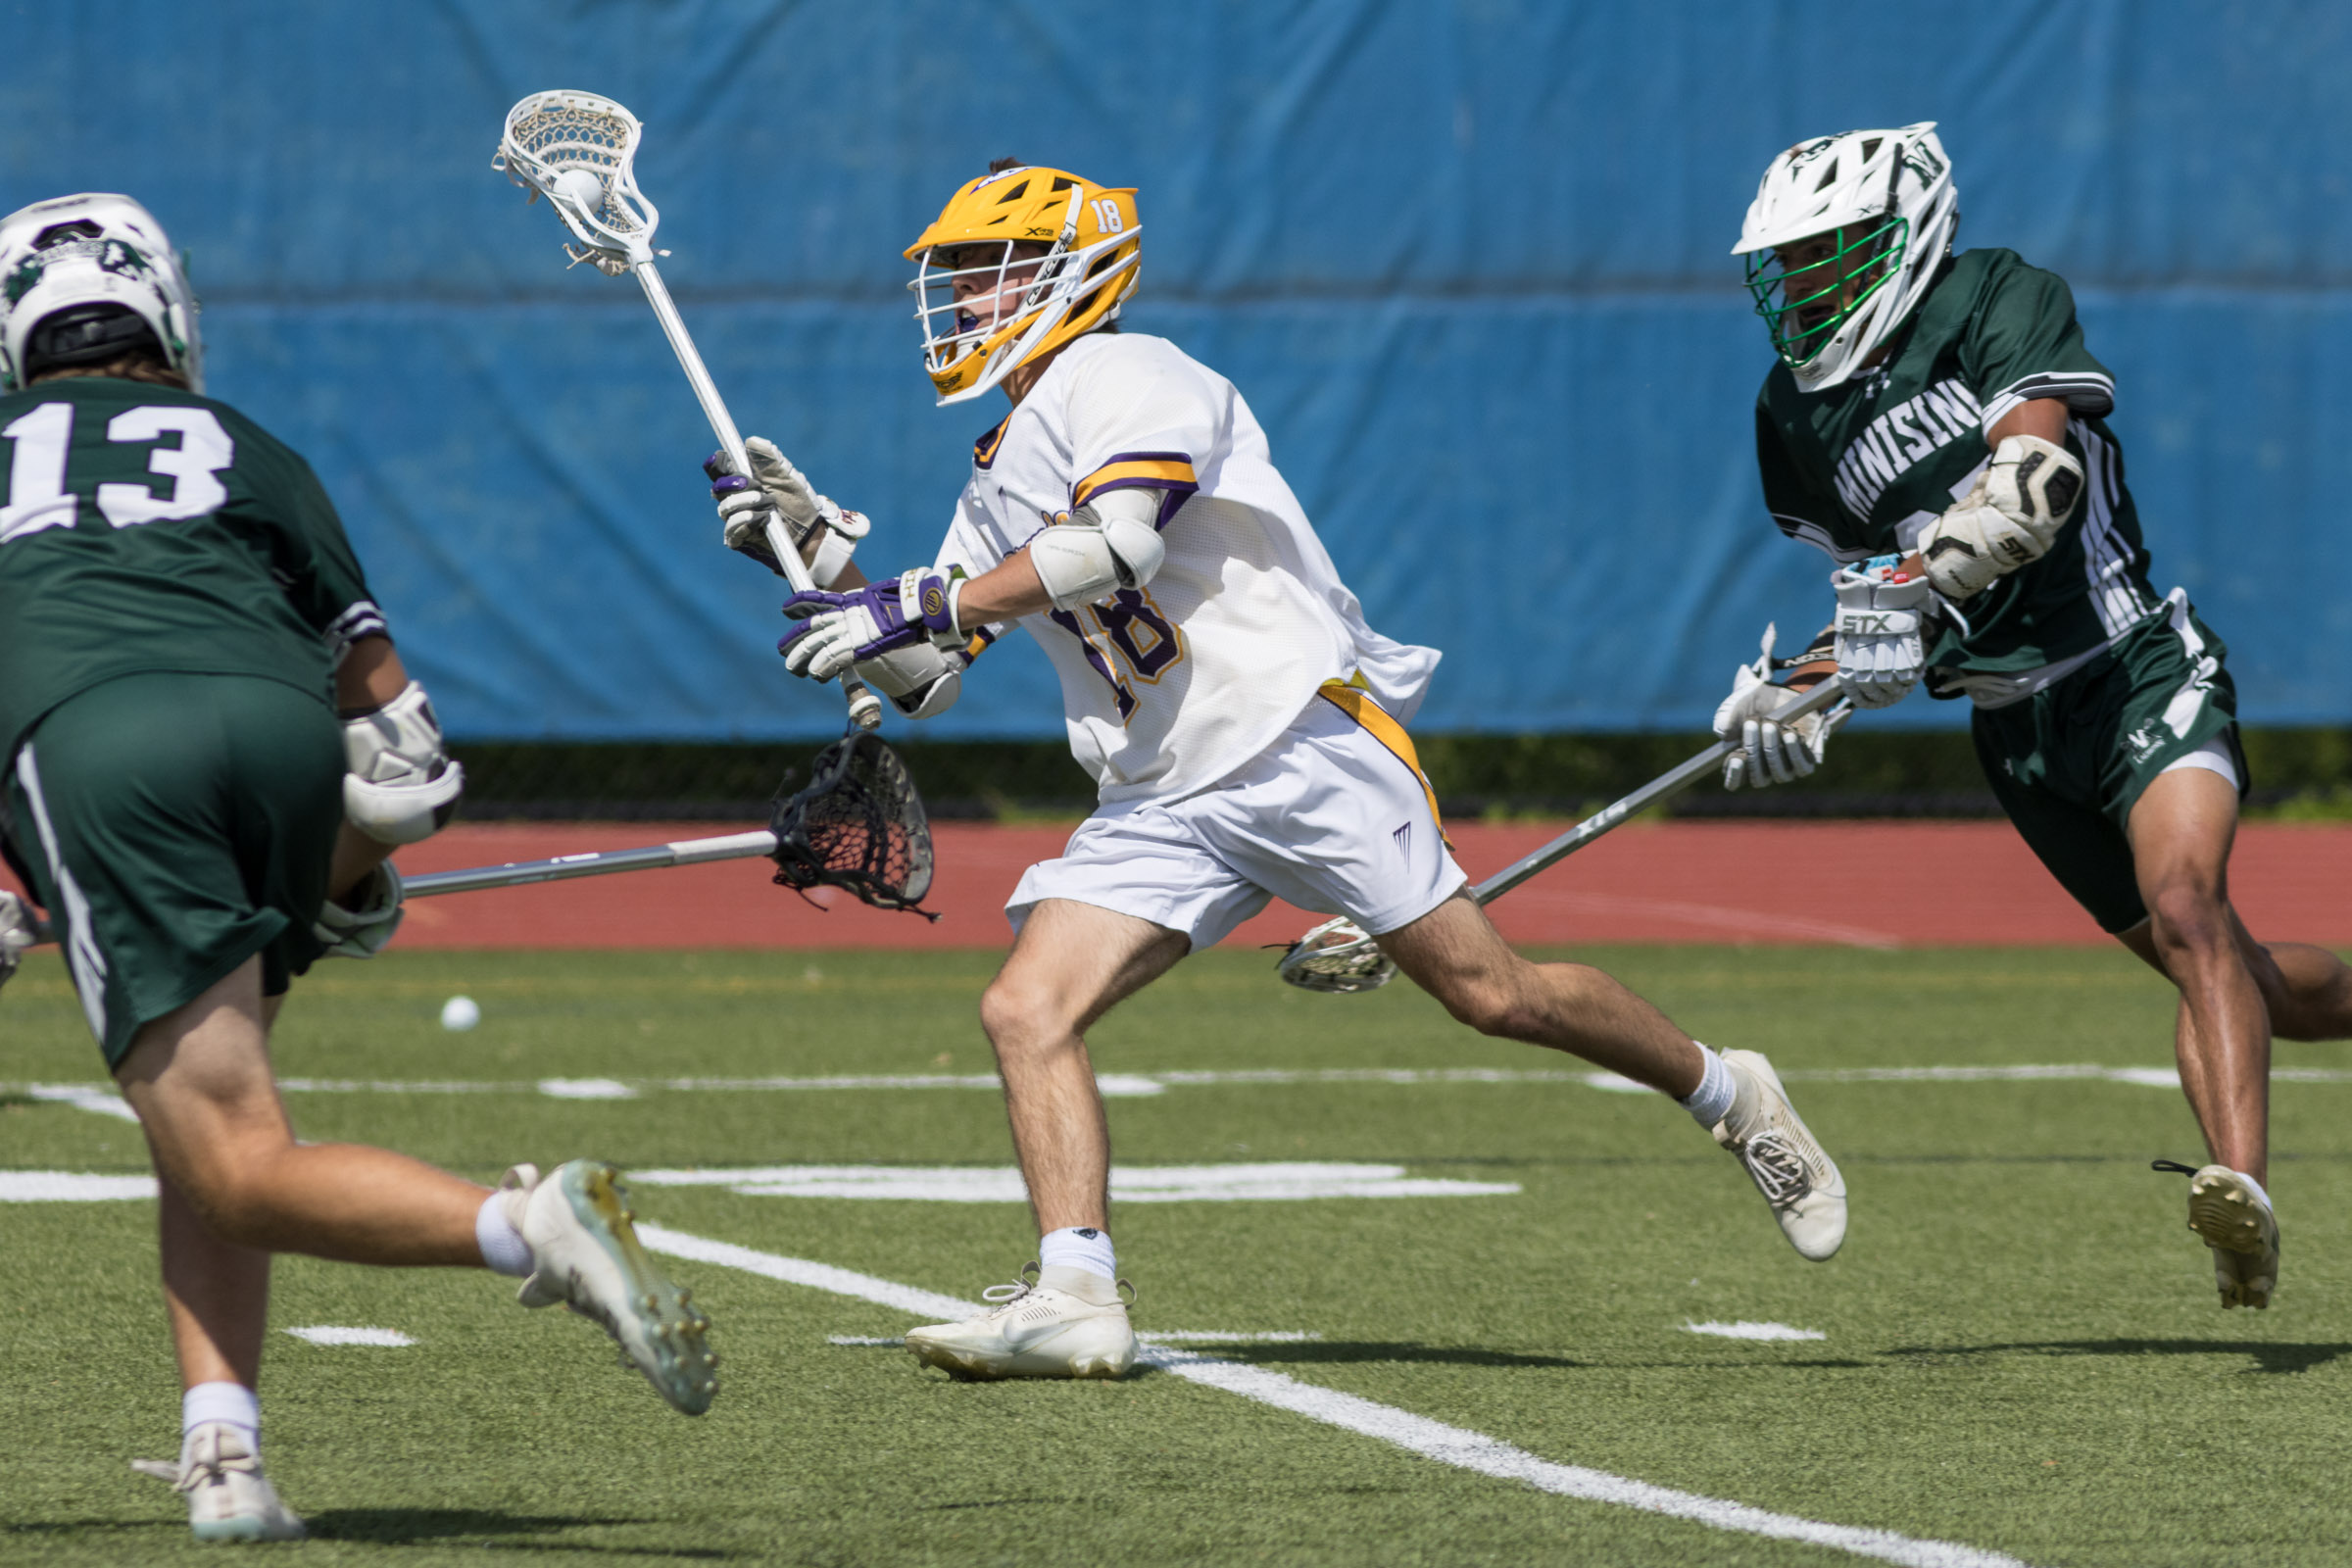 A Warwick Valley varsity boys lacrosse player carries the ball between two Minisink Valley players during the Section 9 Class B championship game.